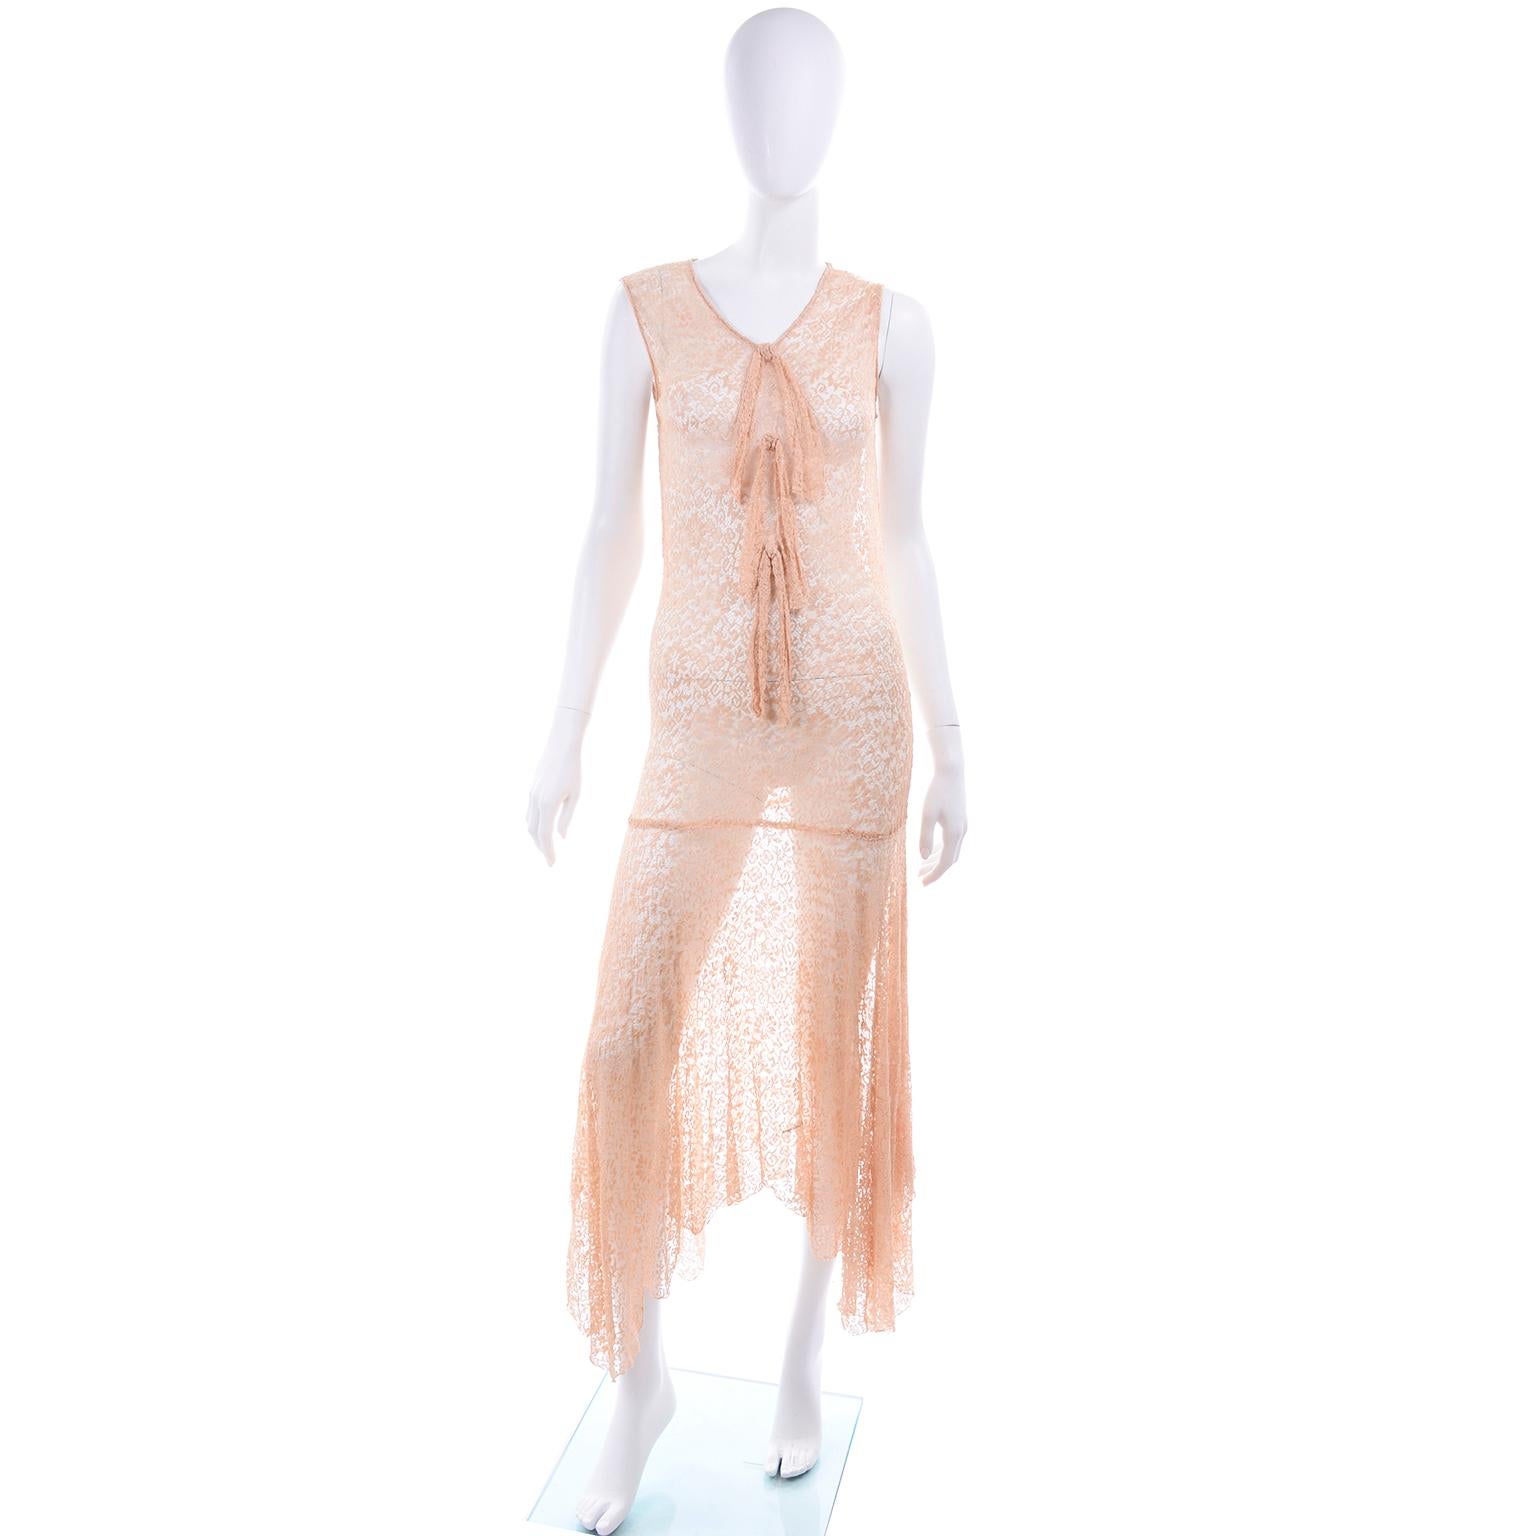 This is a 1930's vintage stretch lace dress in a peach / tan color with a matching open front jacket. The dress has 3 bows down the front of the drop waist bodice and a bias asymmetrical hemline skirt. The cardigan style jacket has long sleeves and